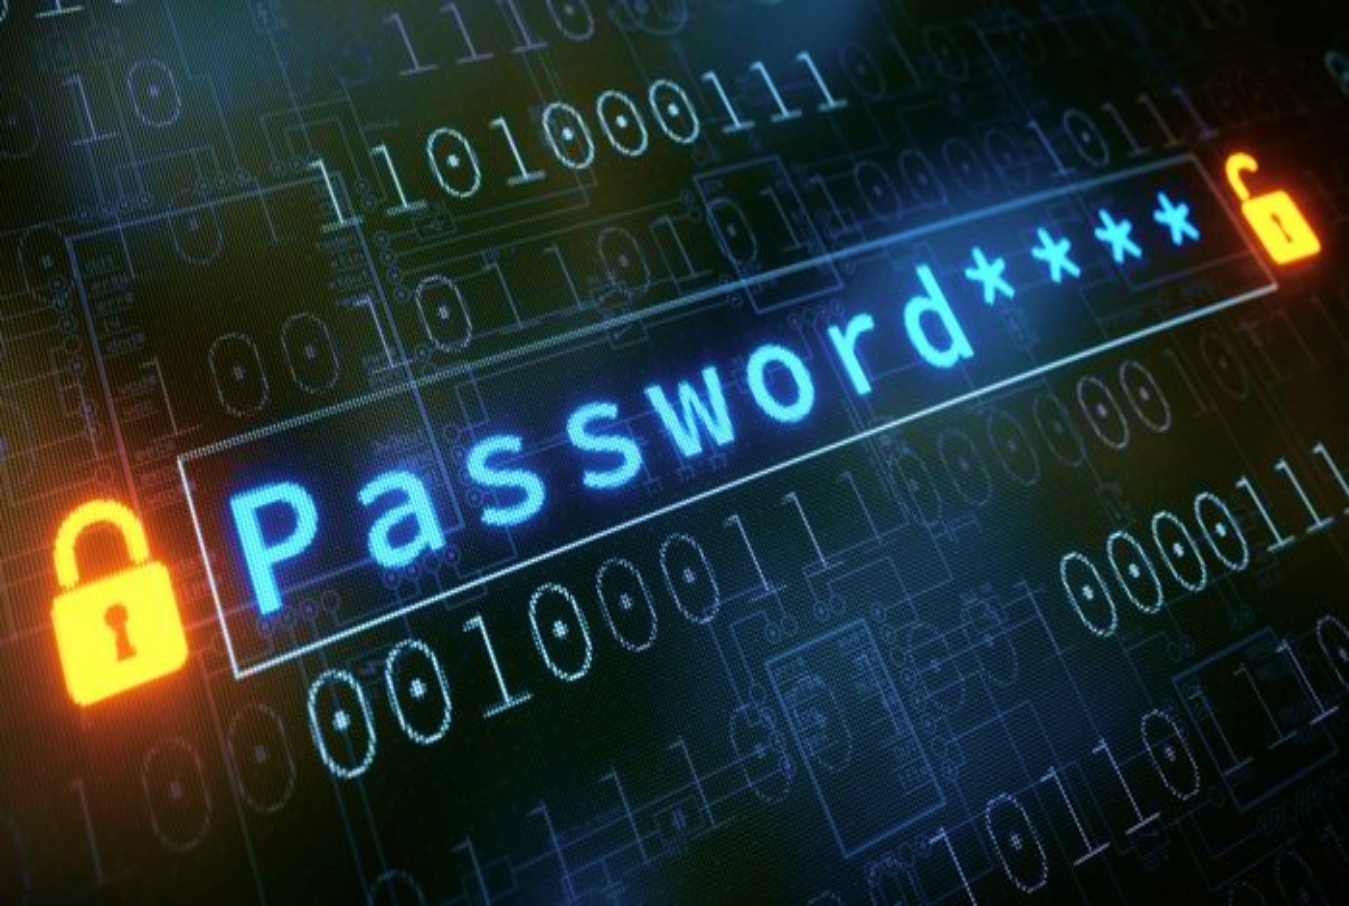 Here is a list of top 25 worst passwords of 2018